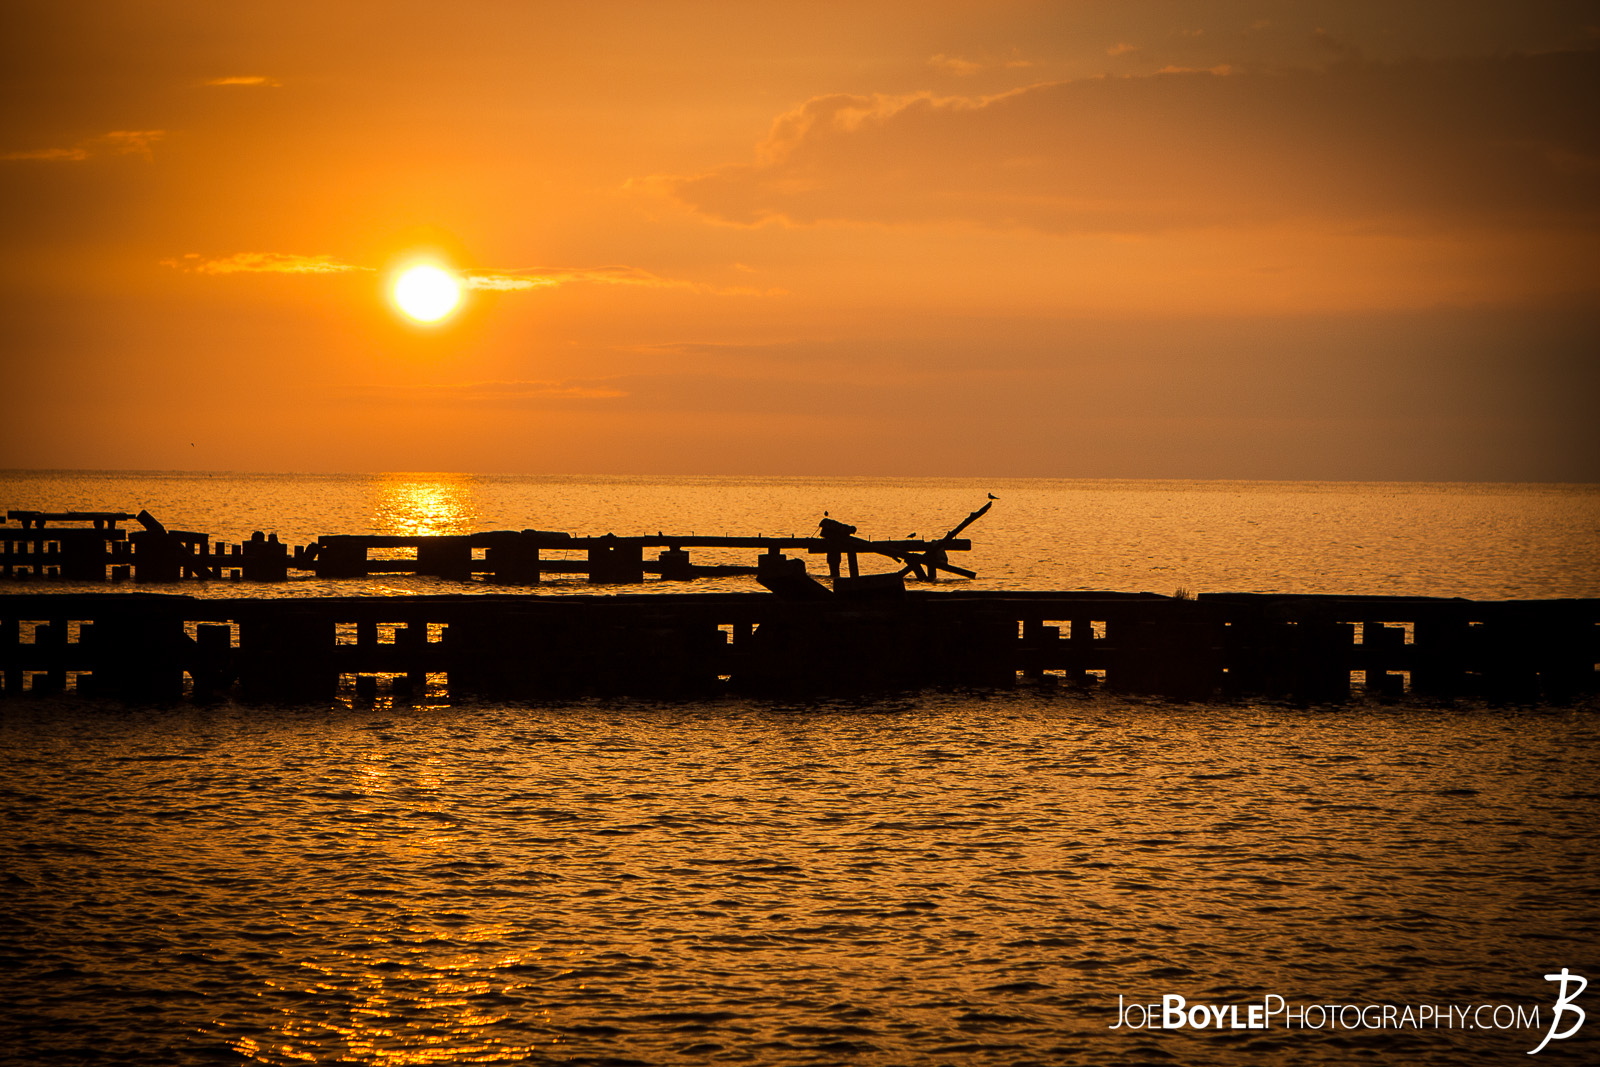  A beautiful sunset off the coast of Lake Erie with a pier in the foreground. This image was captured in Cleveland Ohio, specifically near Edgewater Park.  